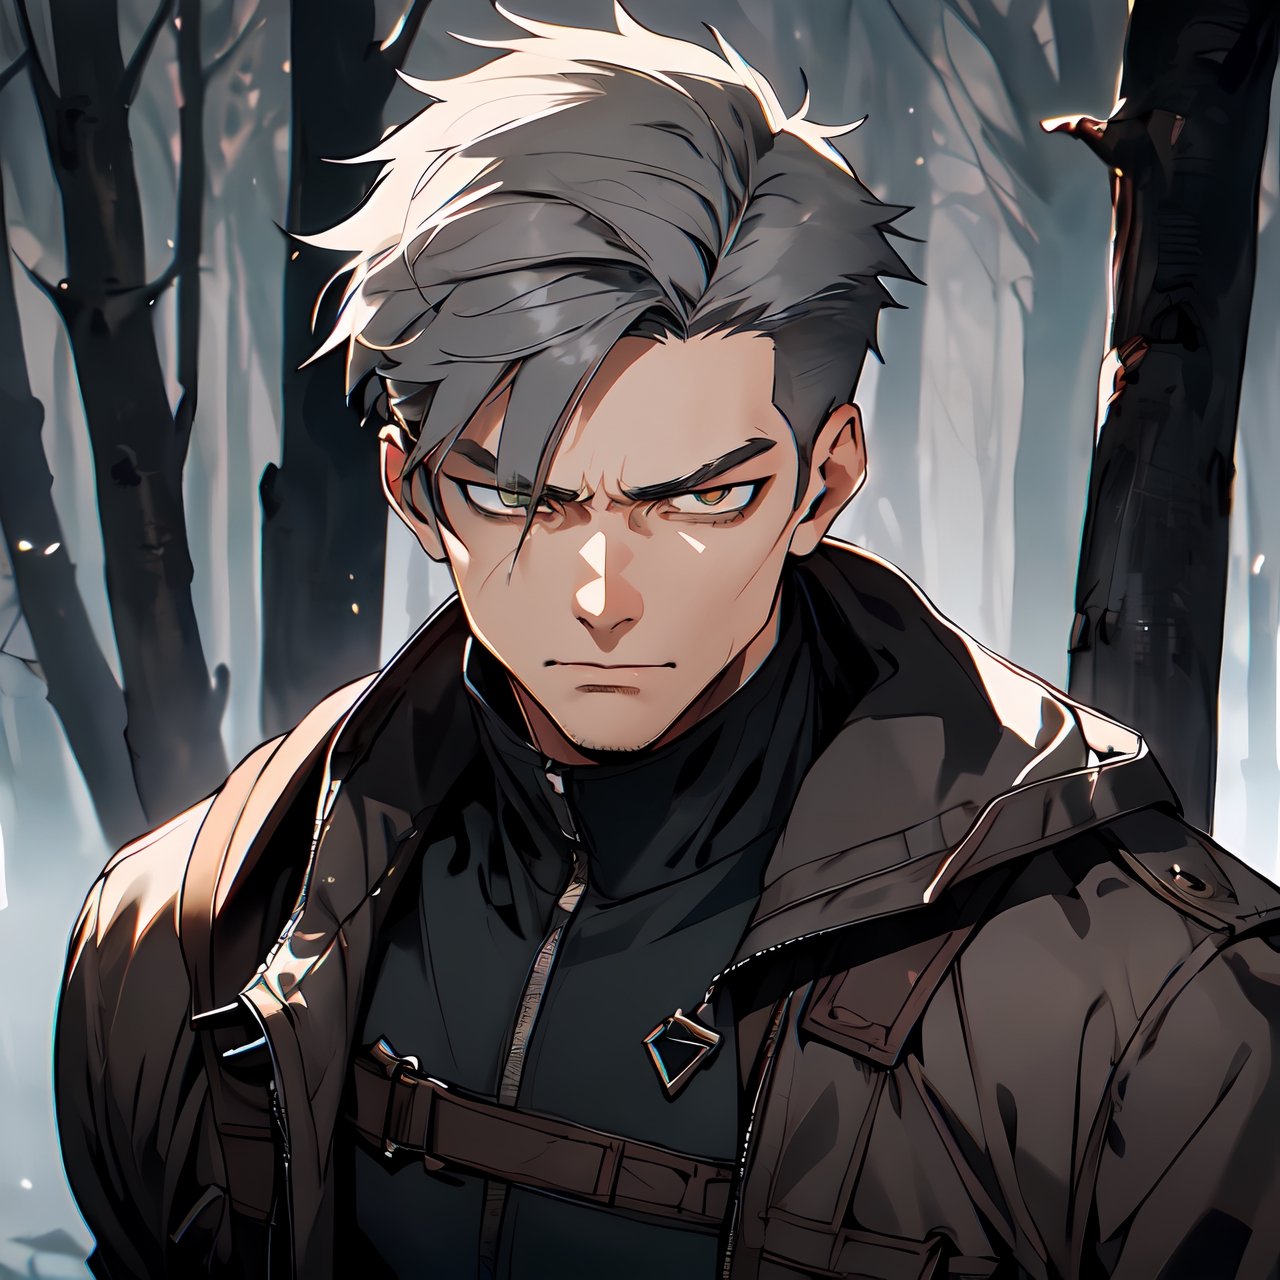 (Hunter clothing),  (short gray hair),  (short hairstyle),  brown_eyes,  bright eyes,  hunter style custom,  (Assassin's eyes),  sharpest quality,  extremely detailed,  high resolution, 1 man,  (satisfied_expression),  (agresive_attitude),  dark forest background,  bright atmosphere.